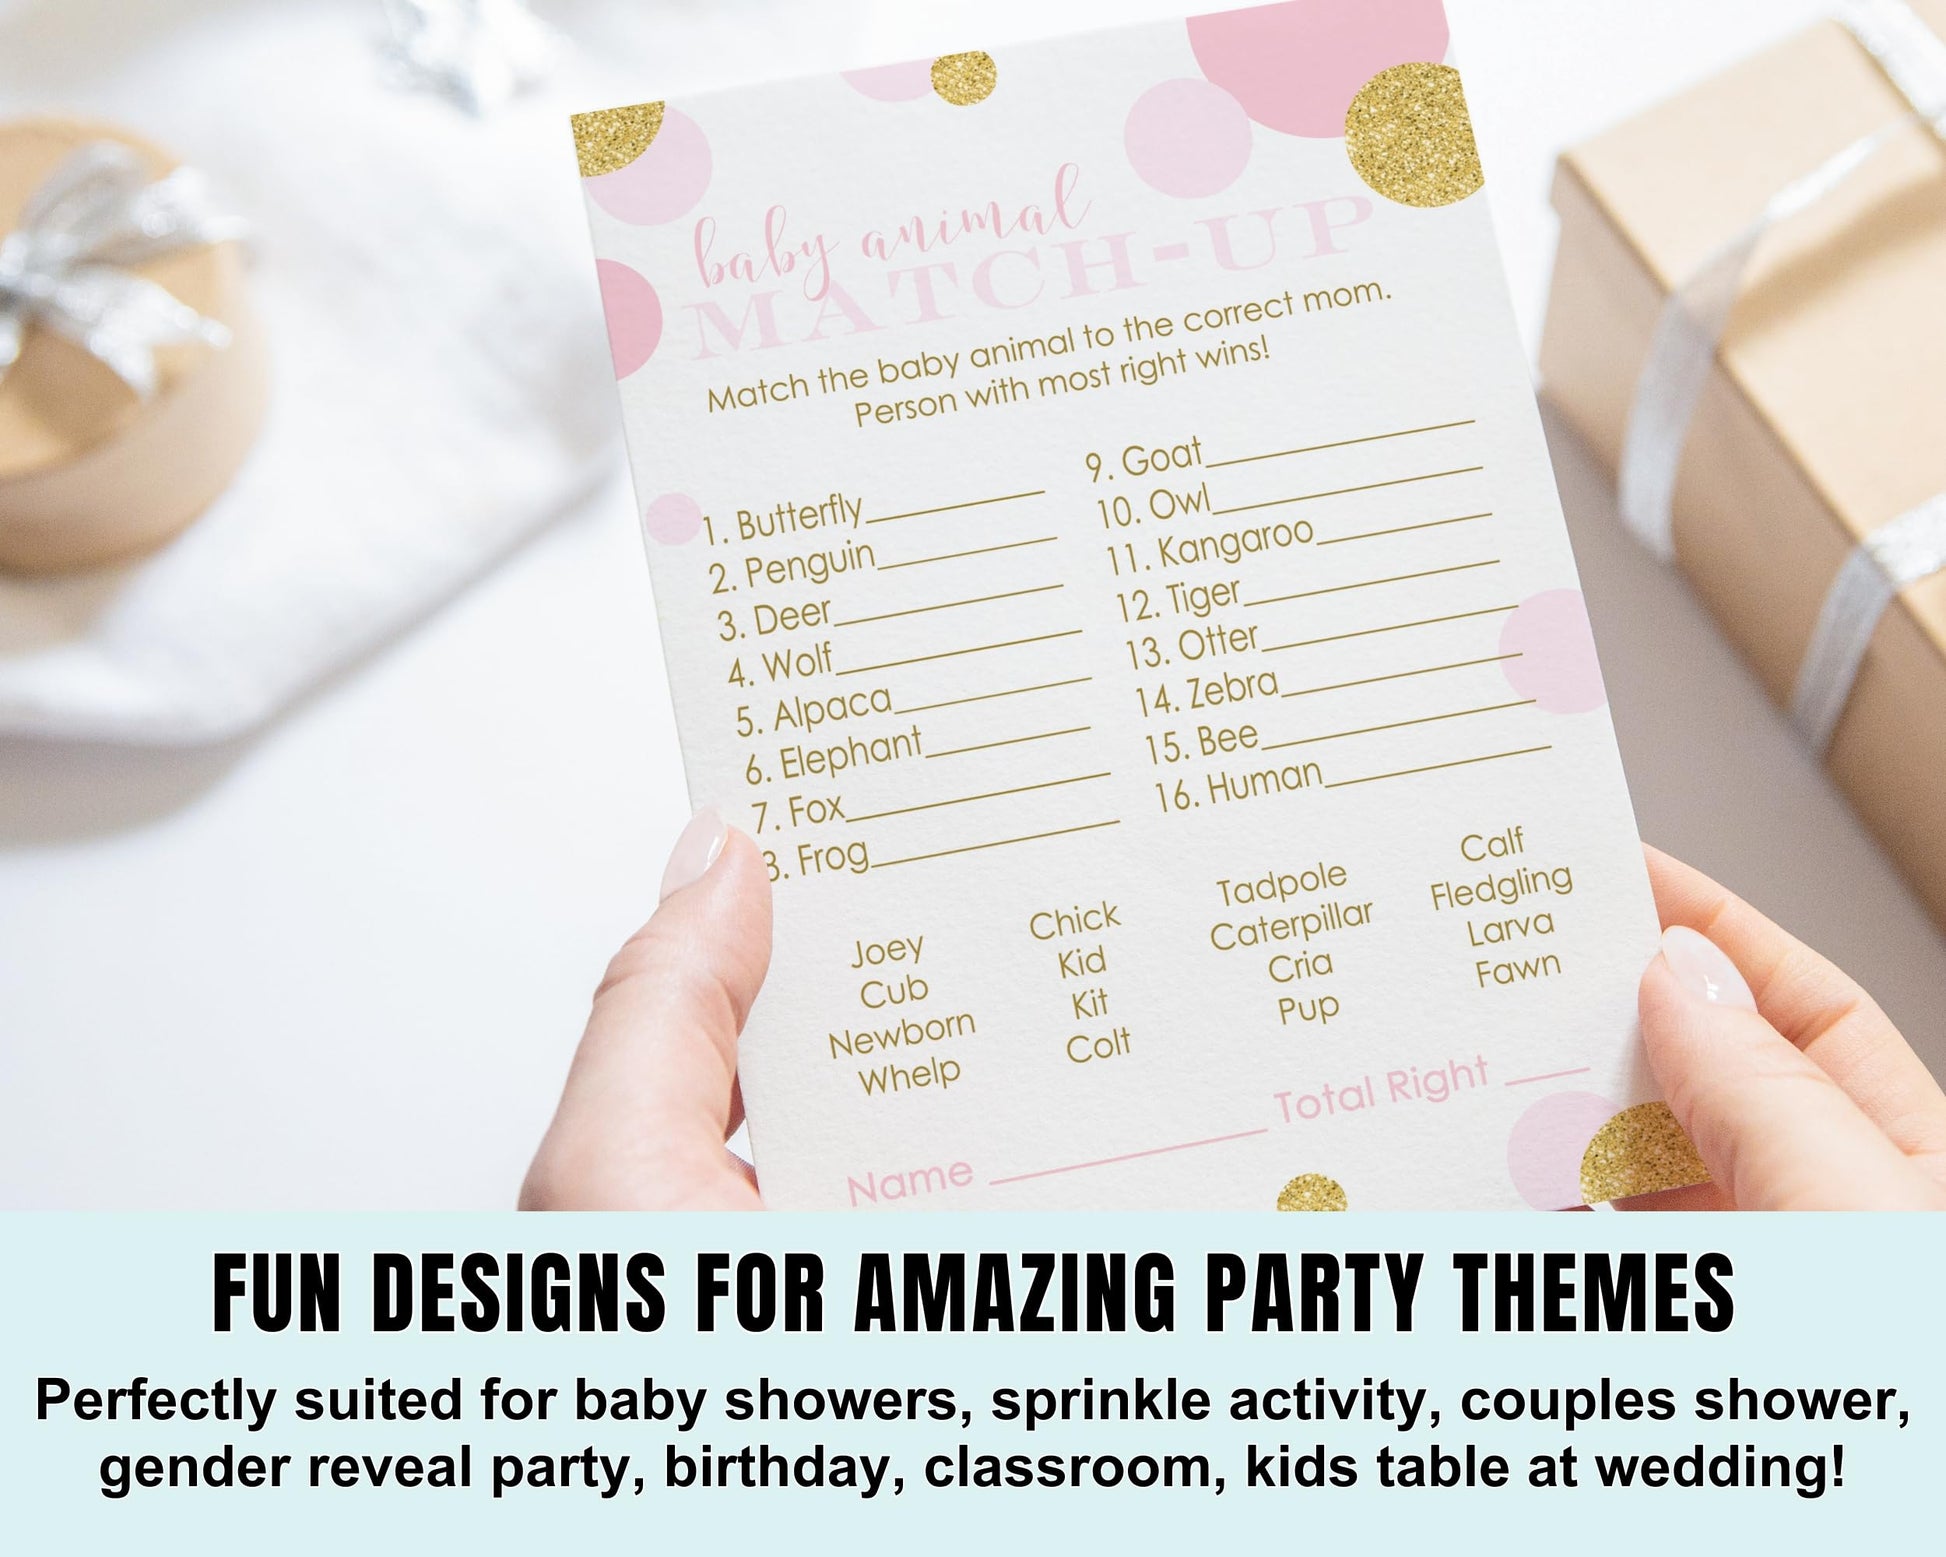 Occasion Fun Guessing Activities Guests Play, Twinkle Star Ideas, 4x6, 25 PackPaper Clever Party